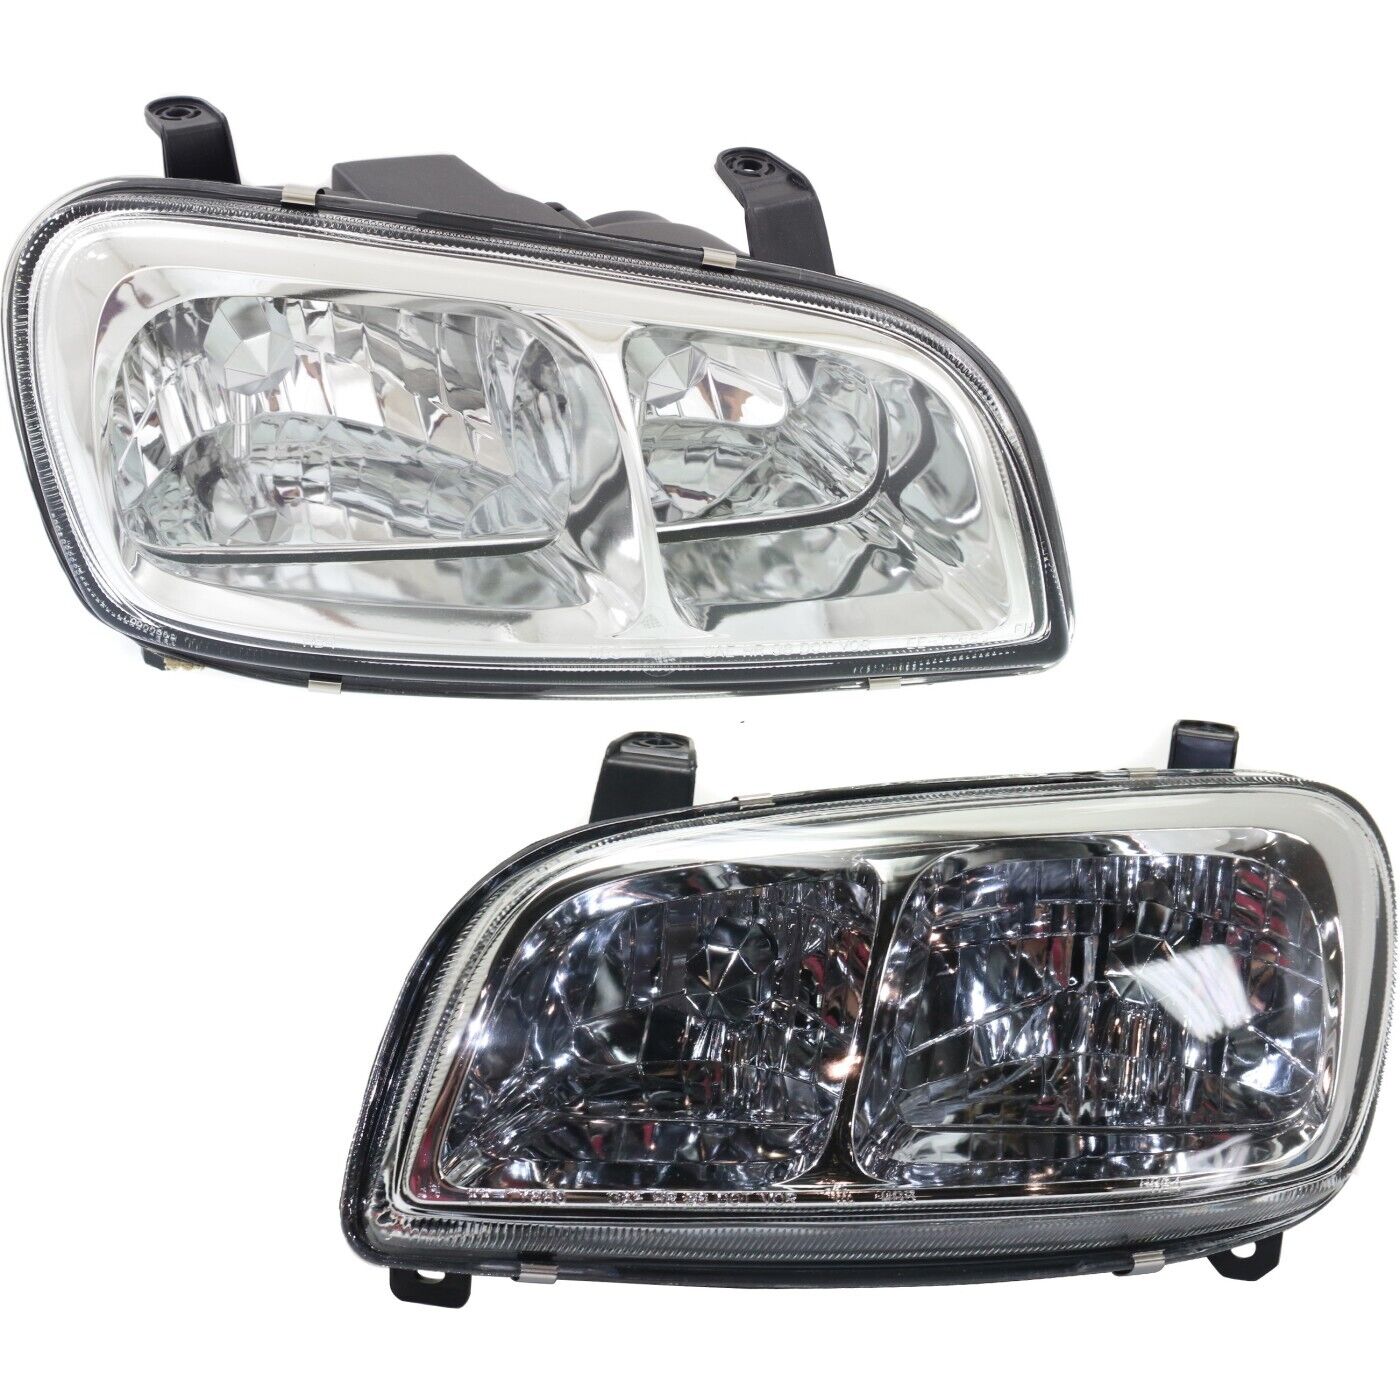 Headlight Set For 98 99 2000 Toyota RAV4 Left and Right With Bulb 2Pc